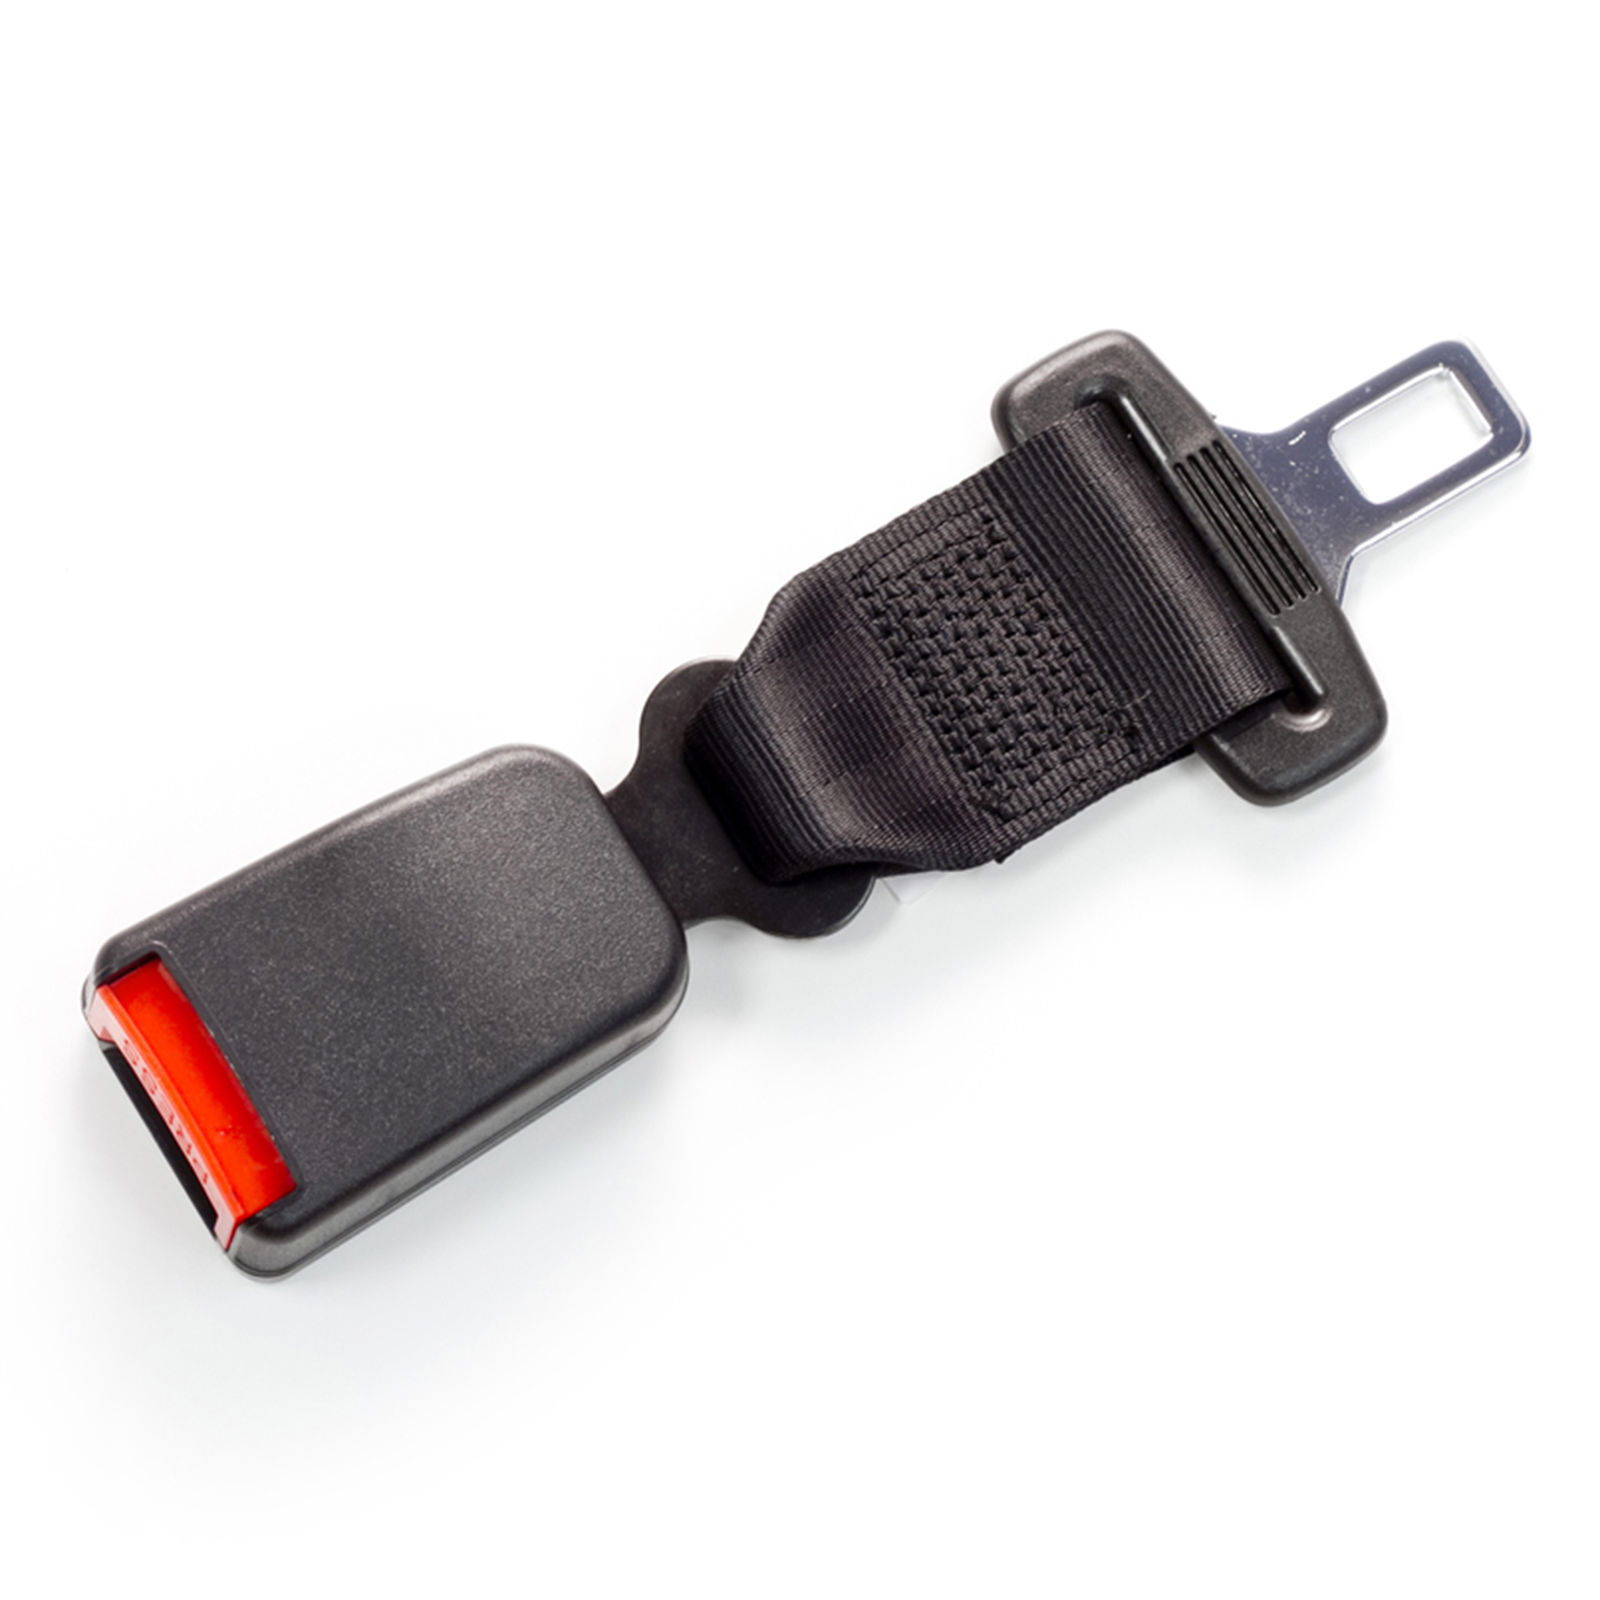 Seat Belt Extension for 2001 Honda Odyssey Front Seats - E4 Safety Certified - $29.99